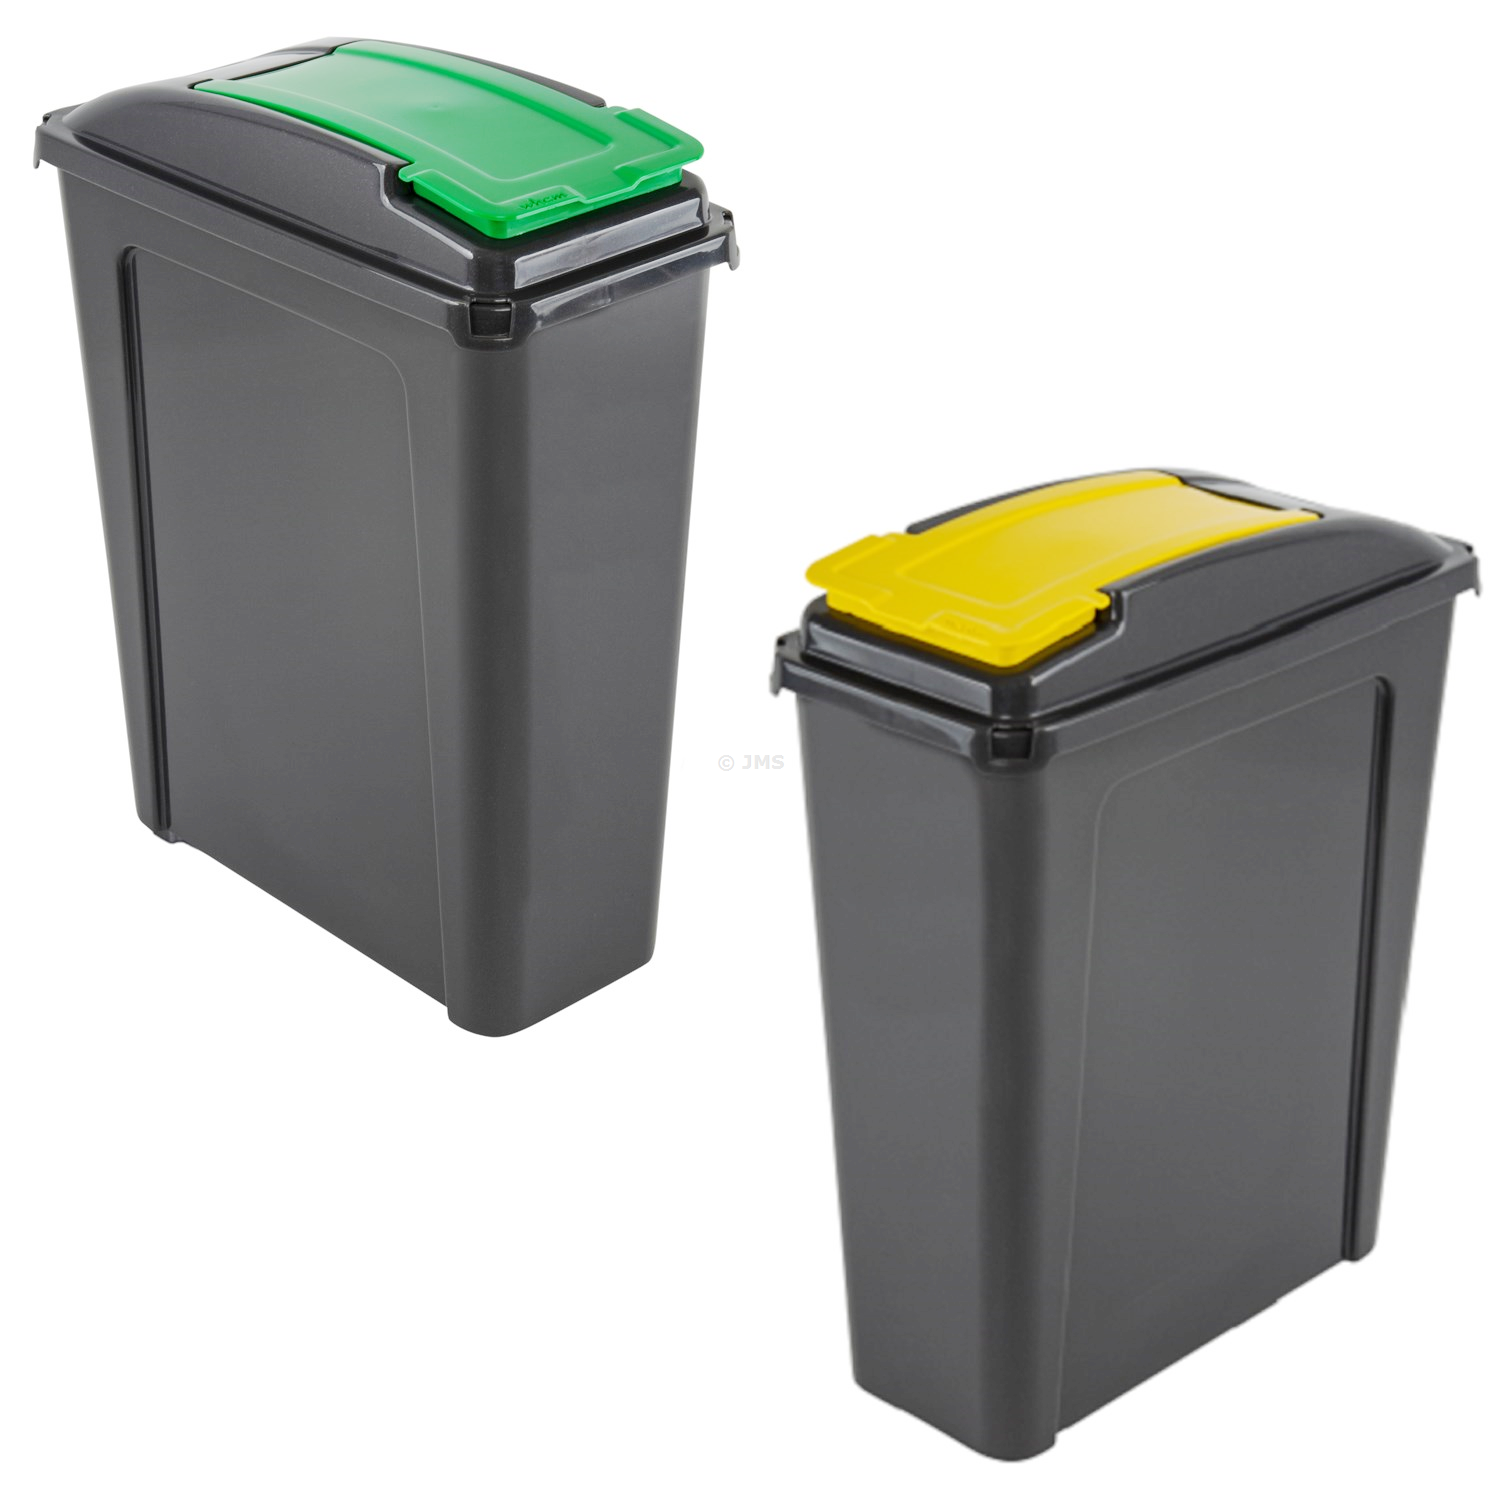 Plastic Recycle It 25L Slimline Bin & Lid GREEN + YELLOW Waste Recycling Dustbin Multi-purpose Storage Container Home Kitchen Garden